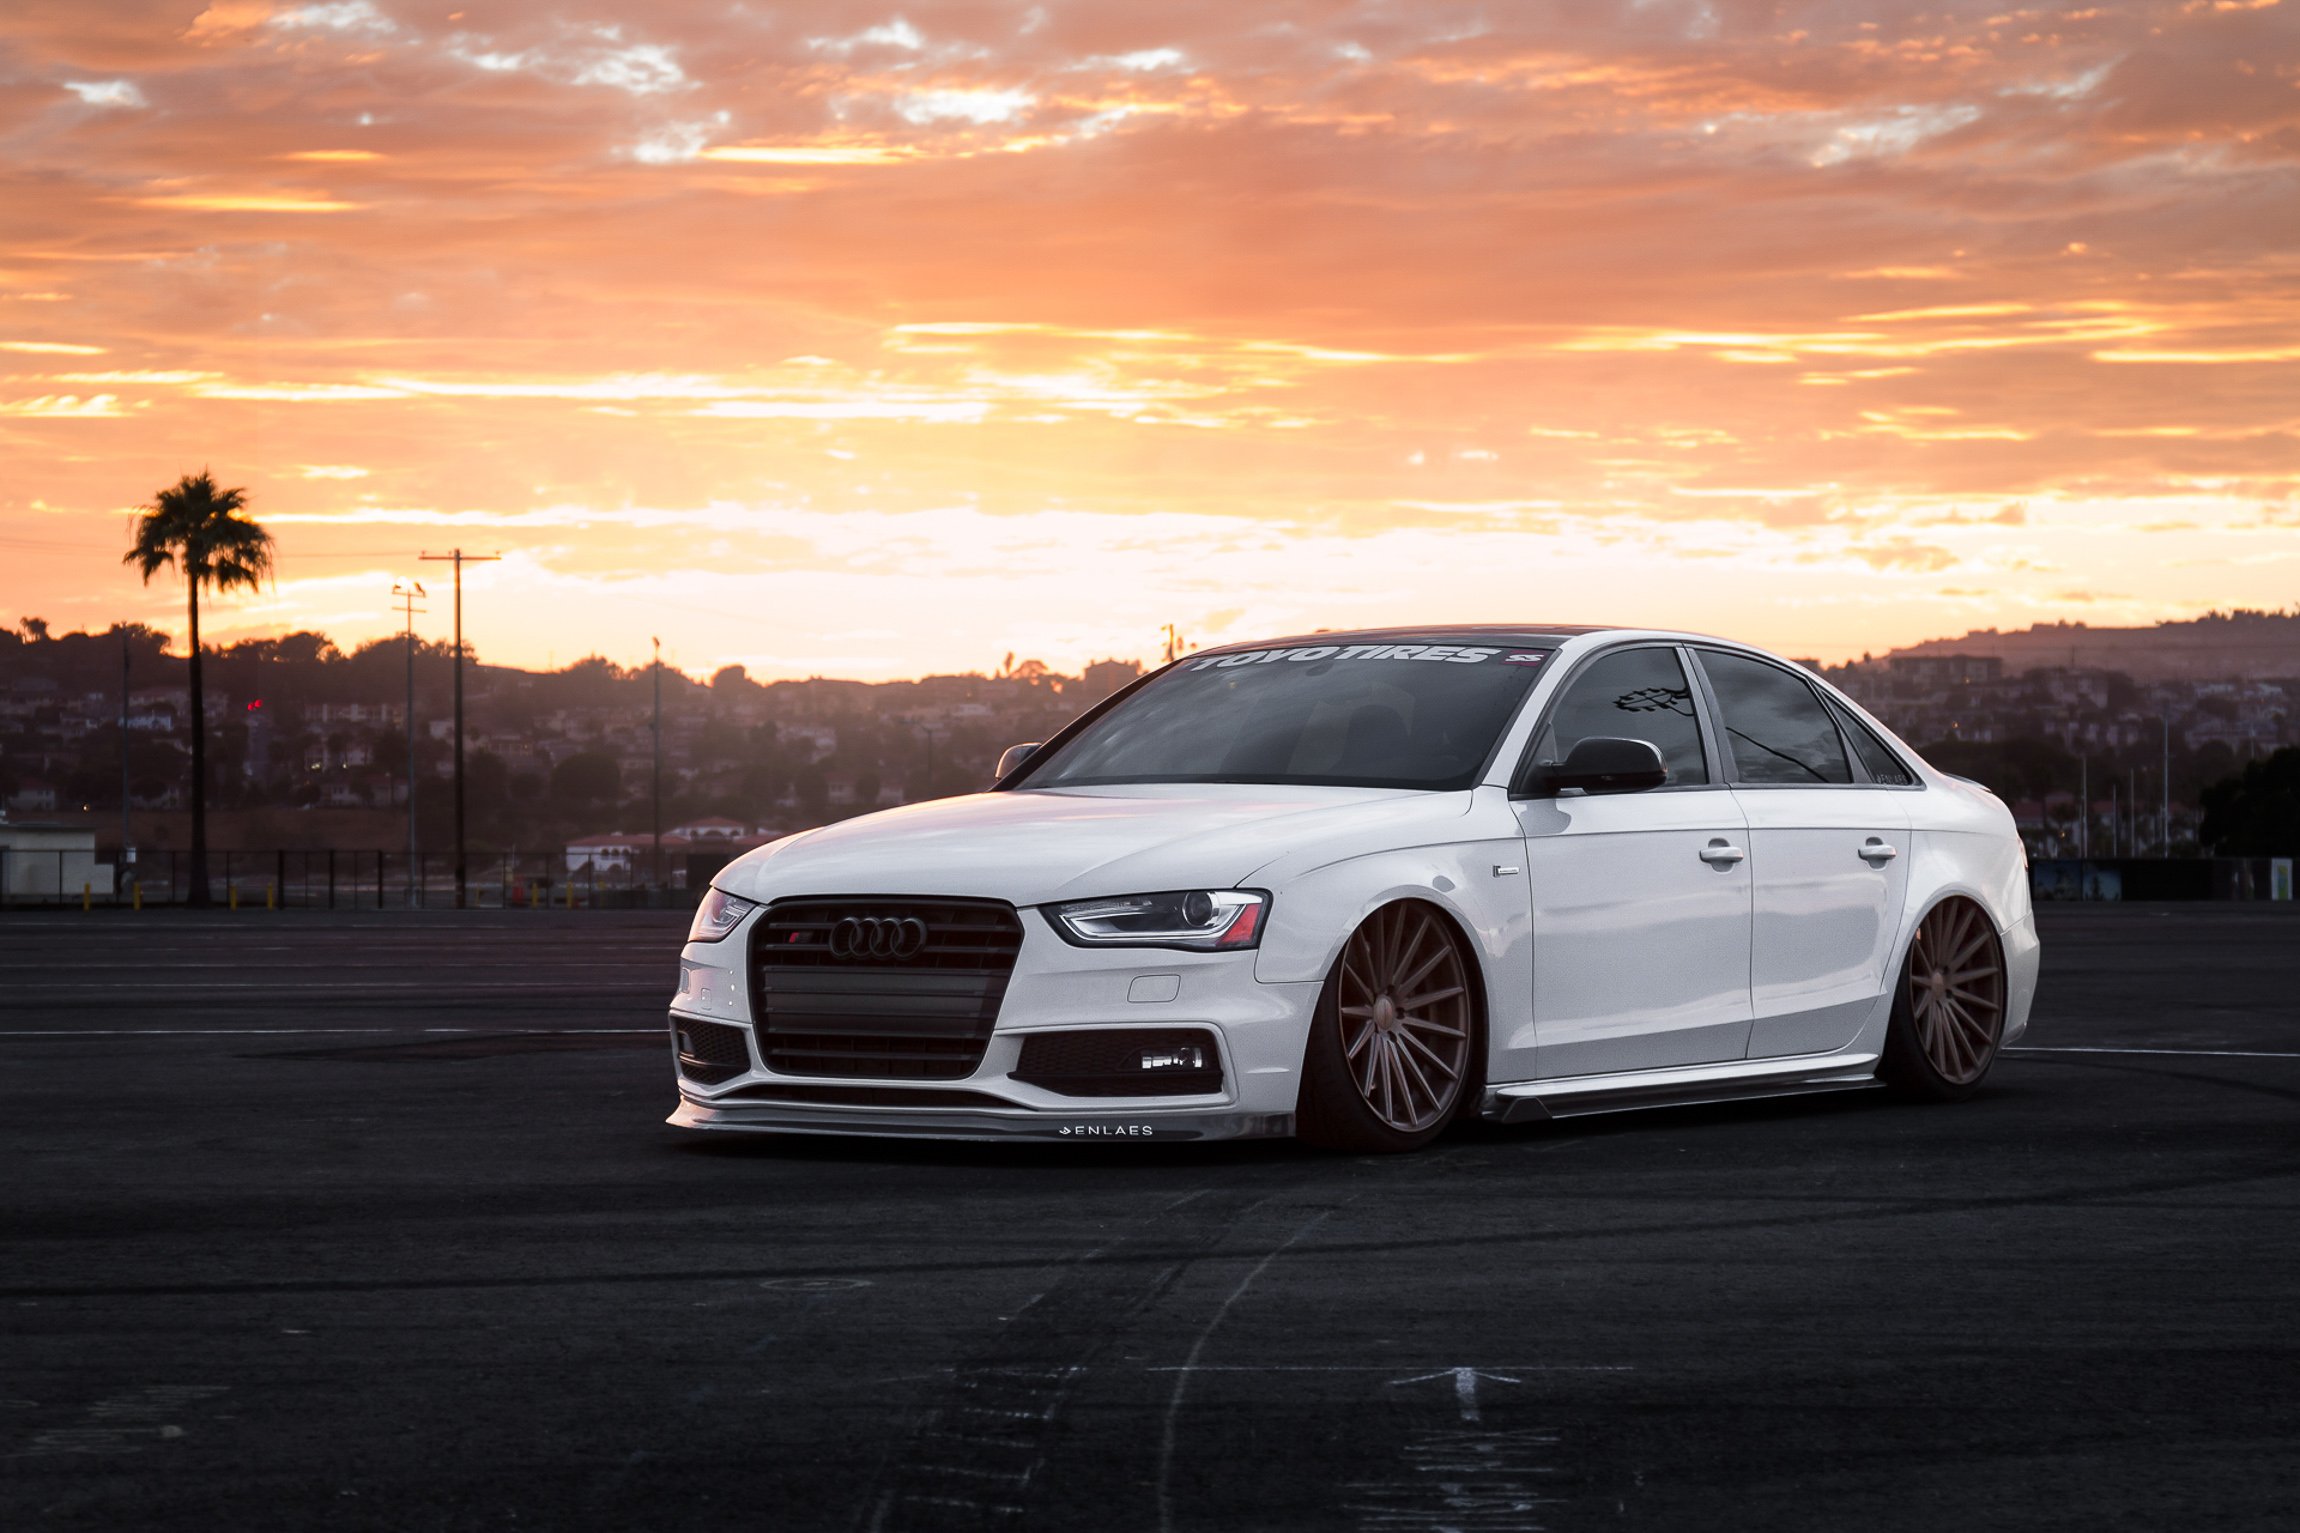 Audi S4 Vossen Wheels Tuning Cars Wallpapers Hd Desktop And Mobile Backgrounds